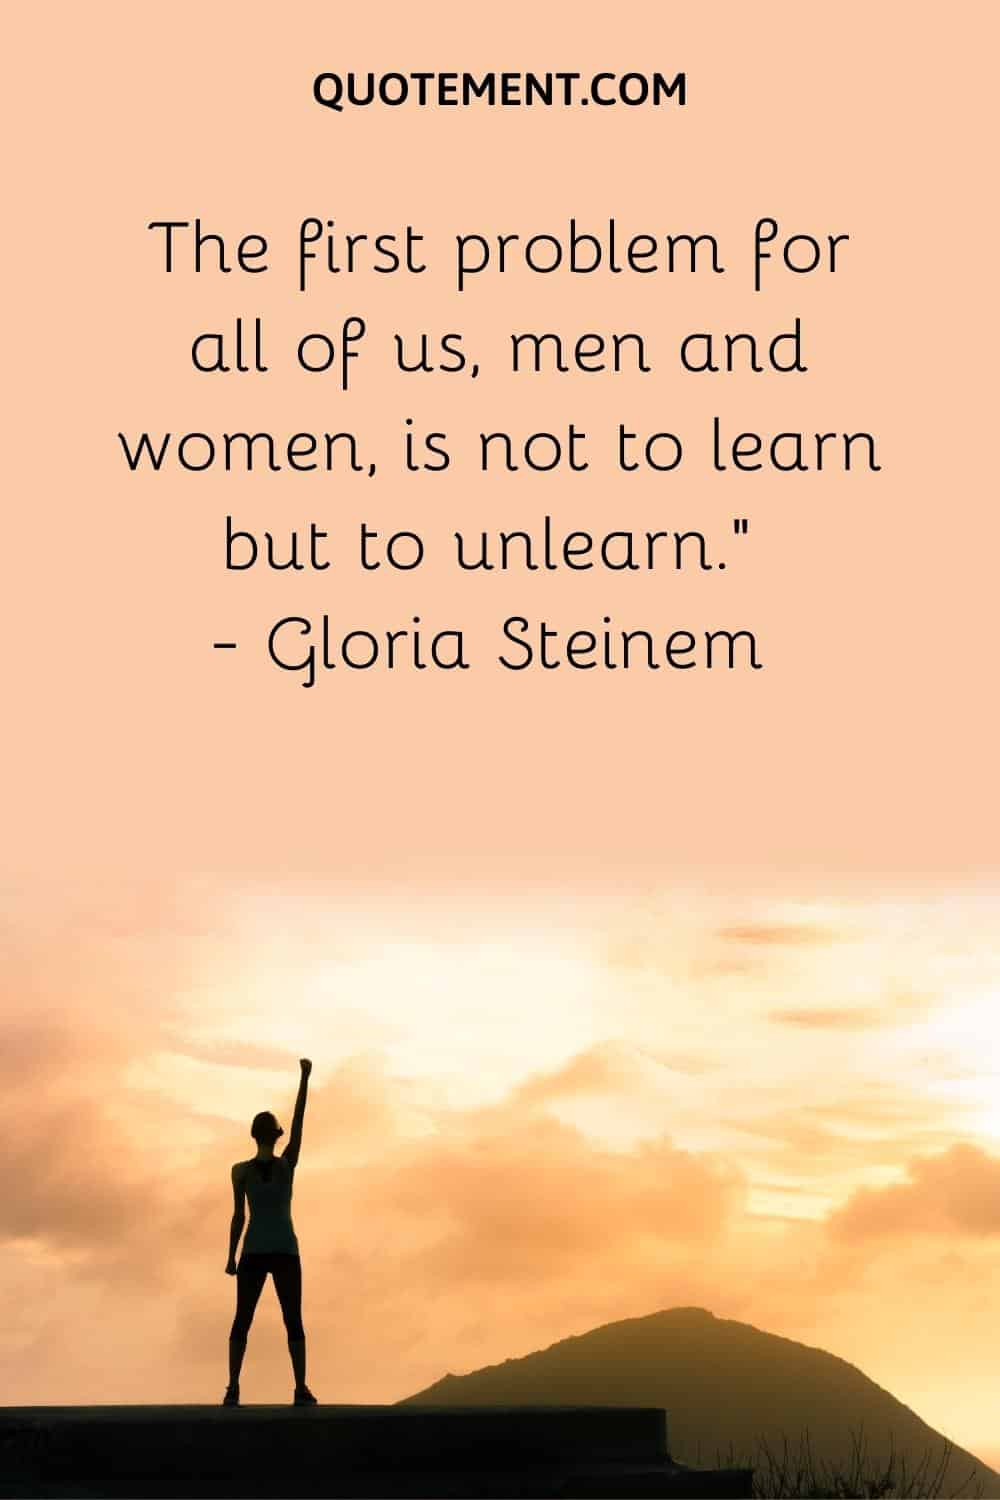 The first problem for all of us, men and women, is not to learn but to unlearn